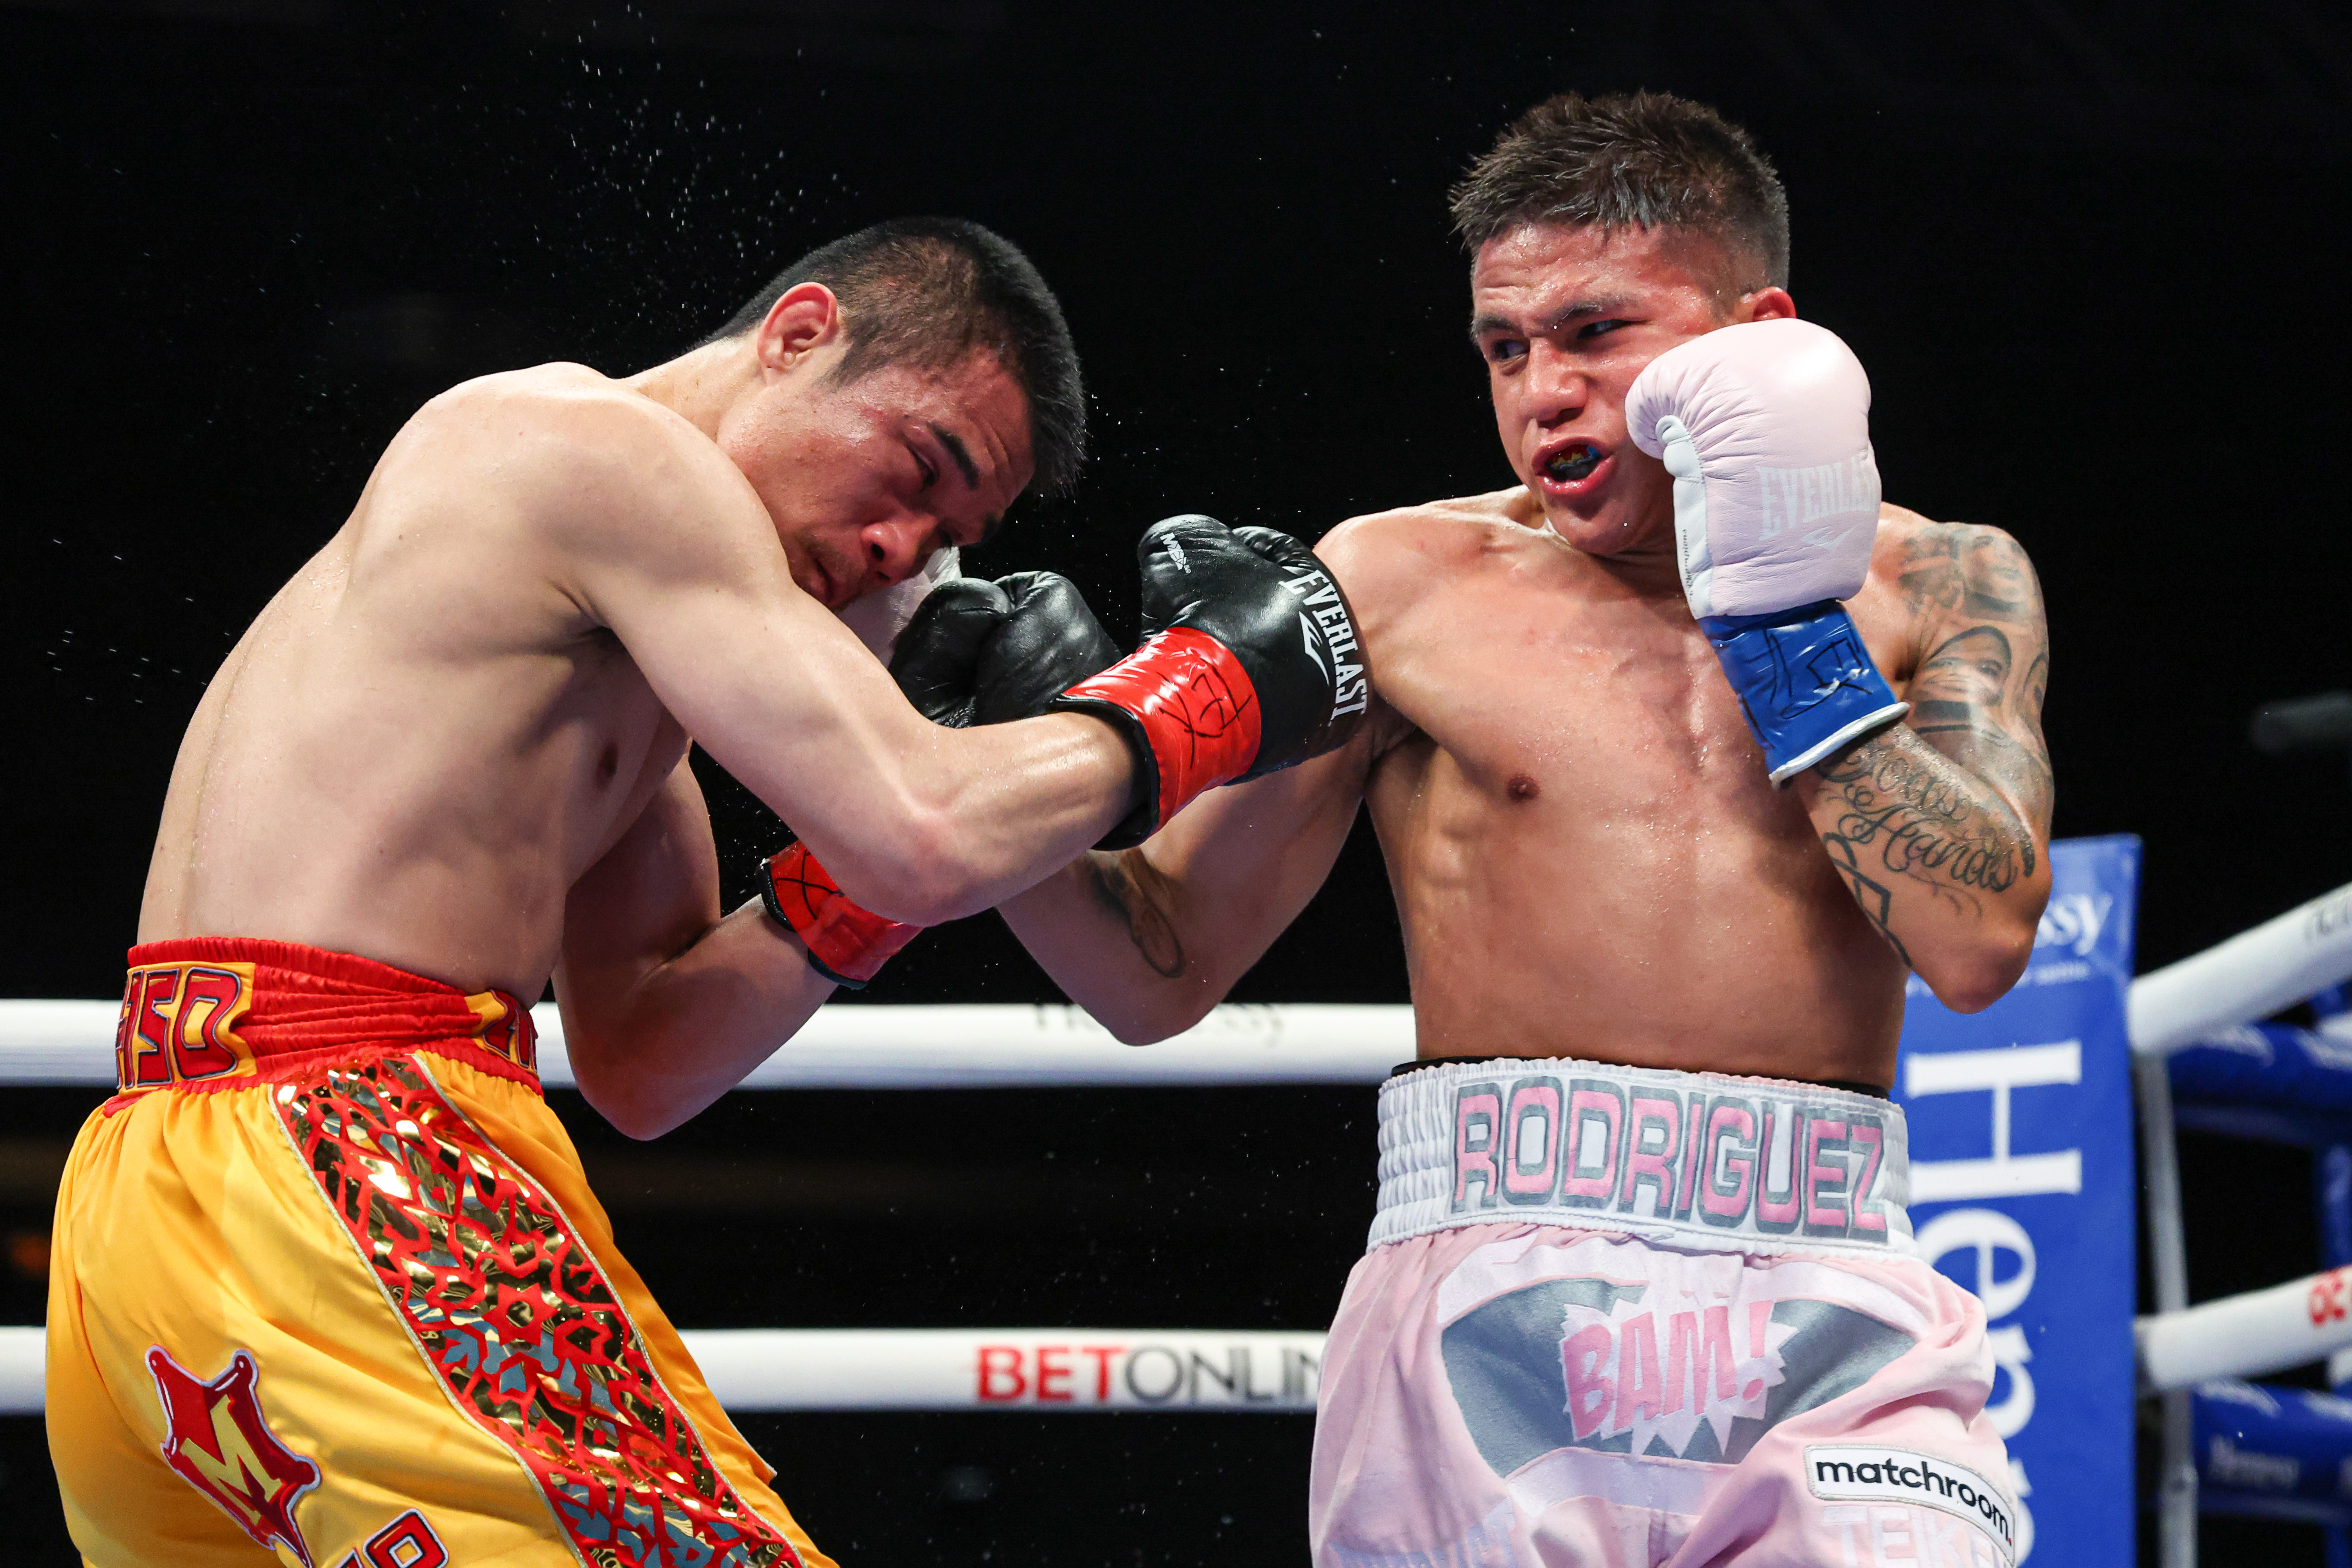 Jesse “Bam” Rodriguez emerged as a true rising star with his stoppage win over Srisaket Sor Rungvisai